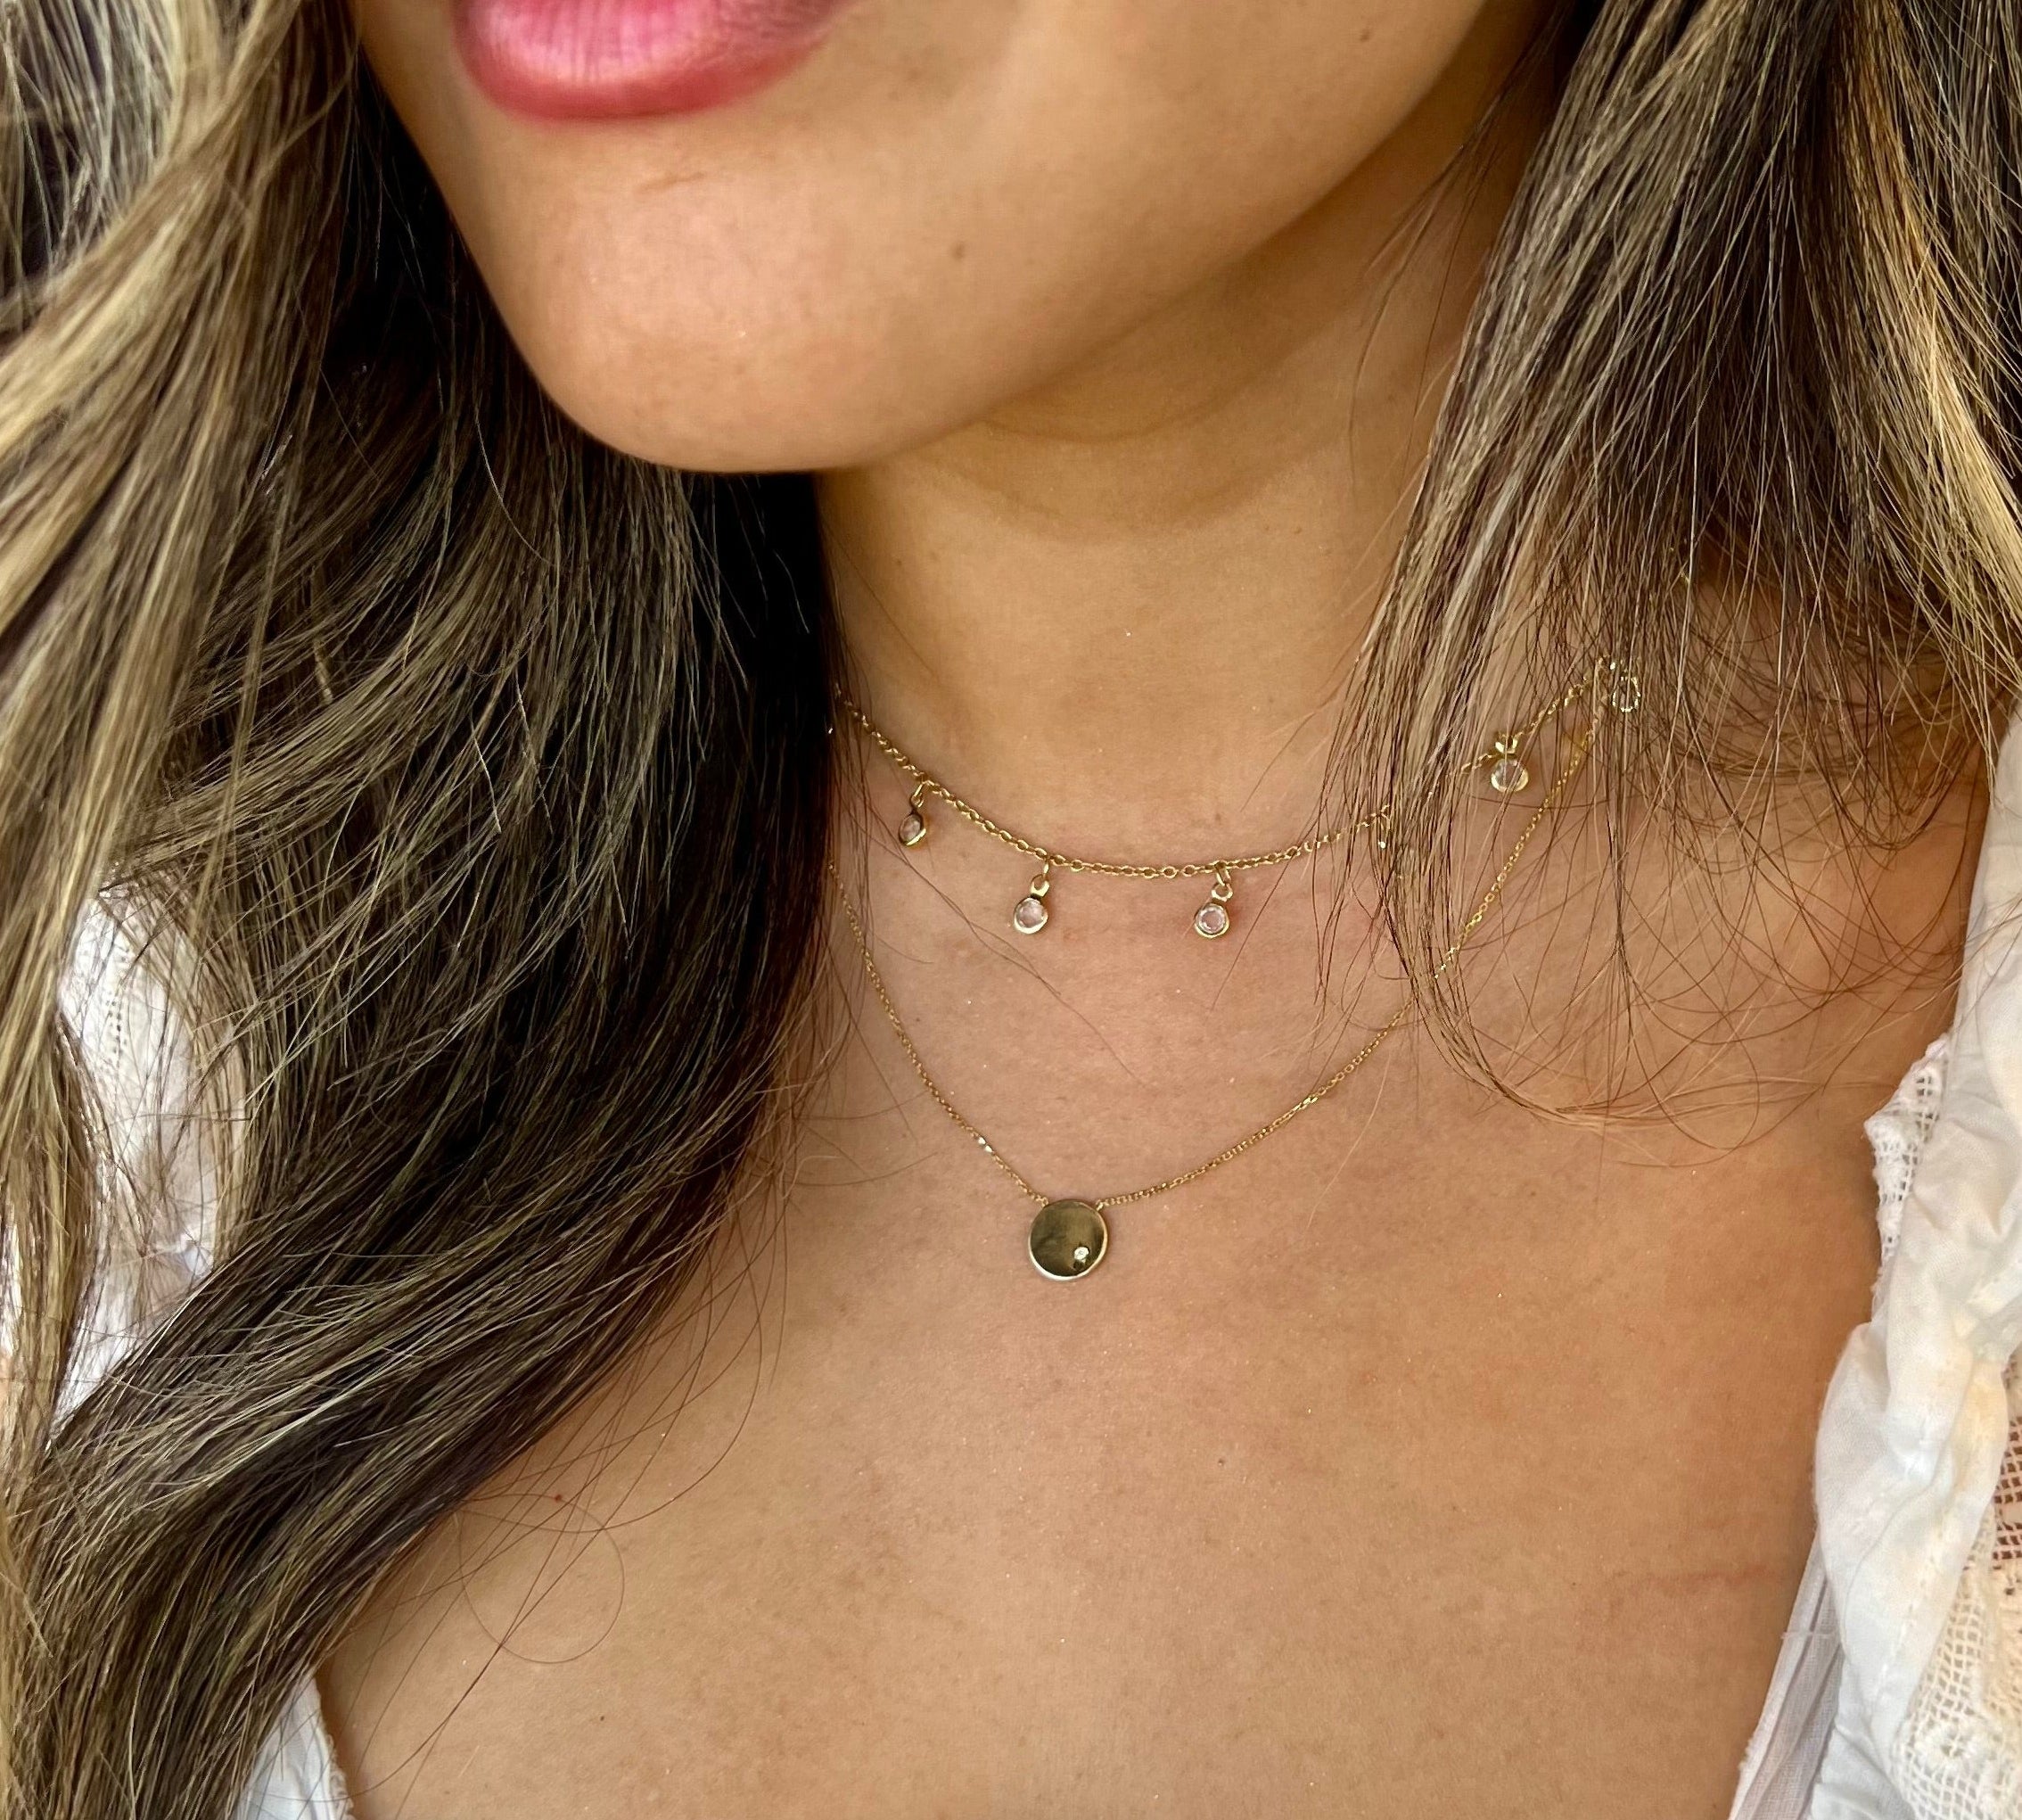 North Star Necklace, shown on model